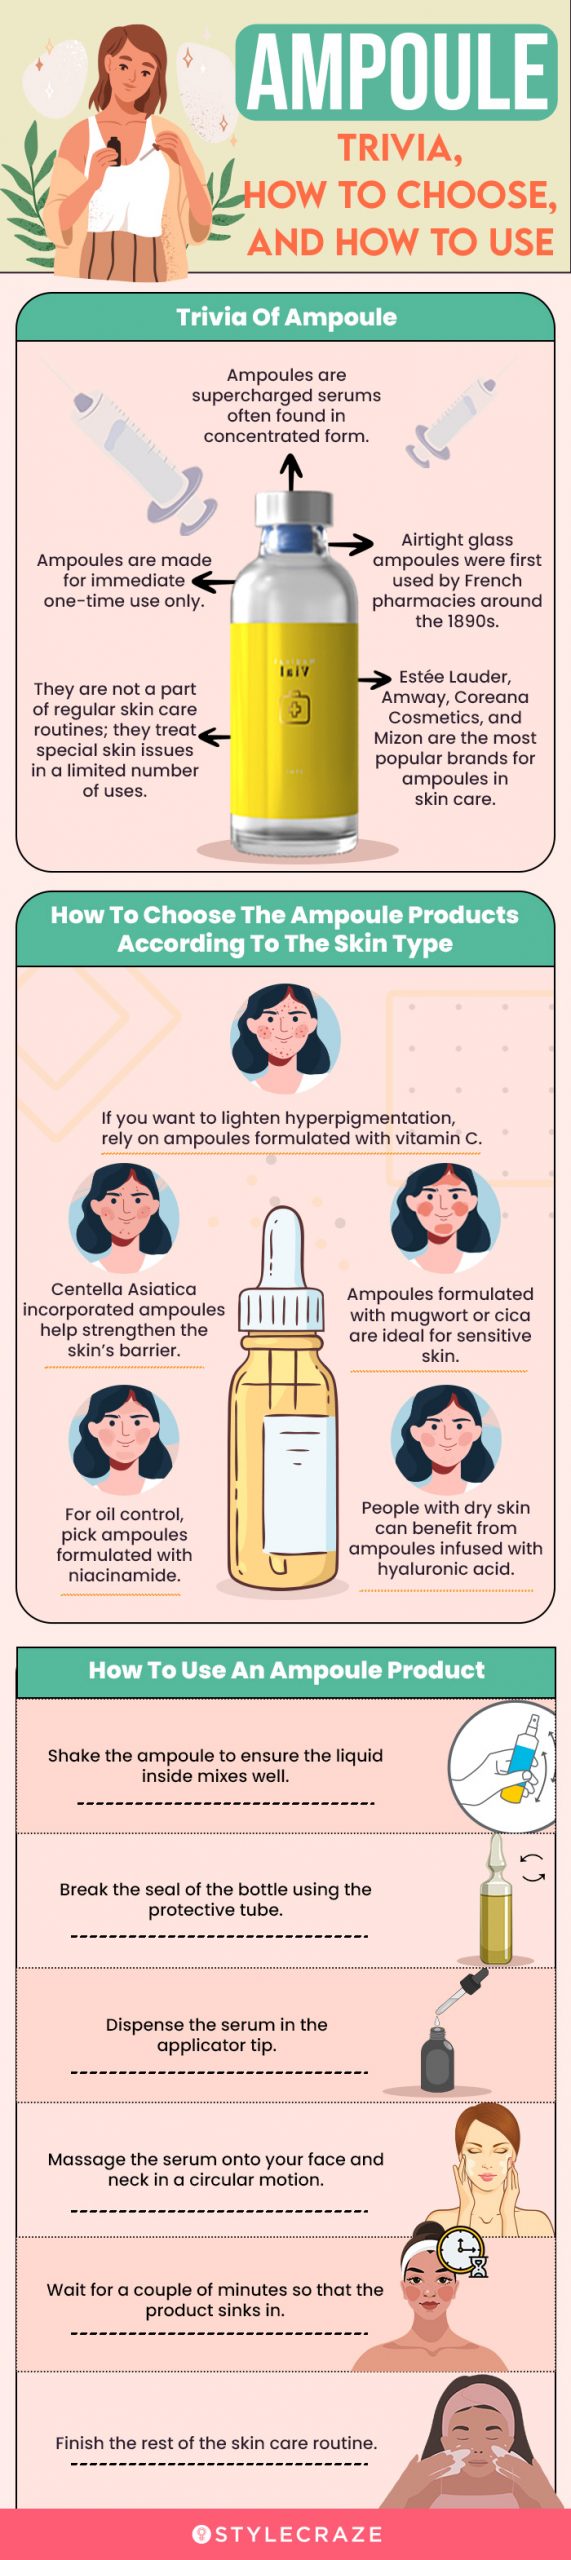 Ampoule: Trivia, How To Choose, And How To Use (infographic)